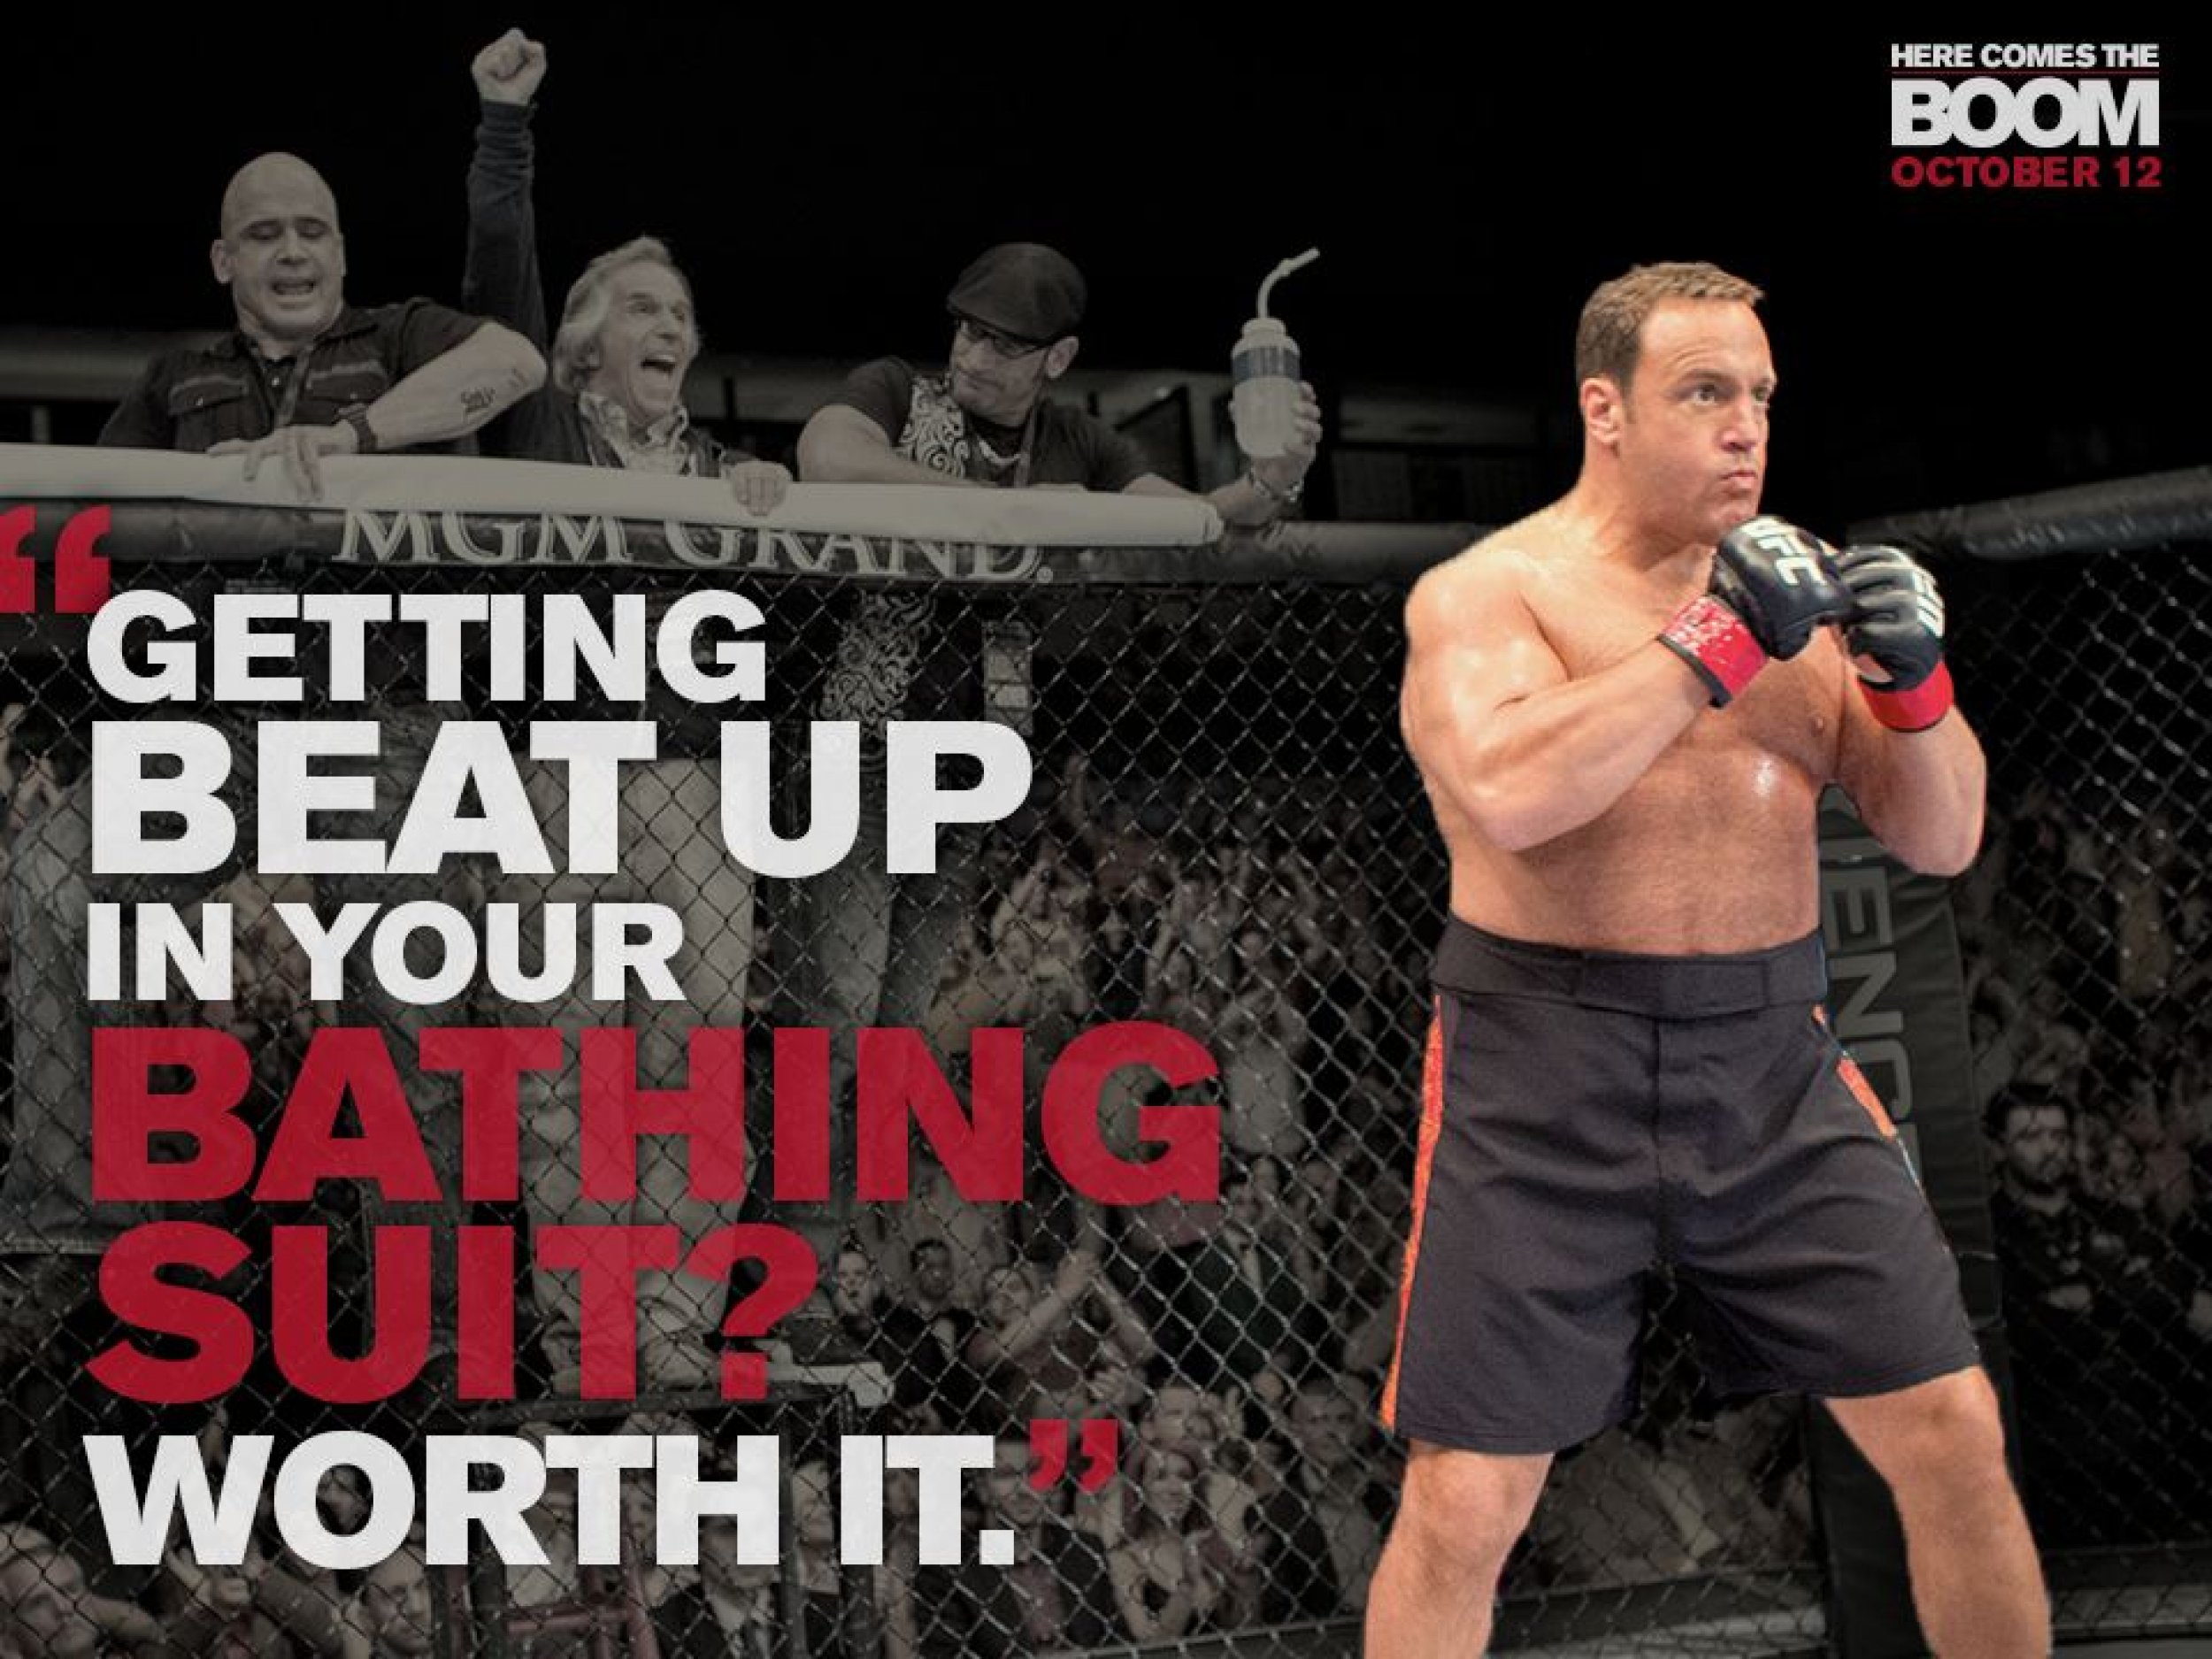 Kevin James Weight Loss Actor Shapes Up For UFC Fighter Role In ‘Here